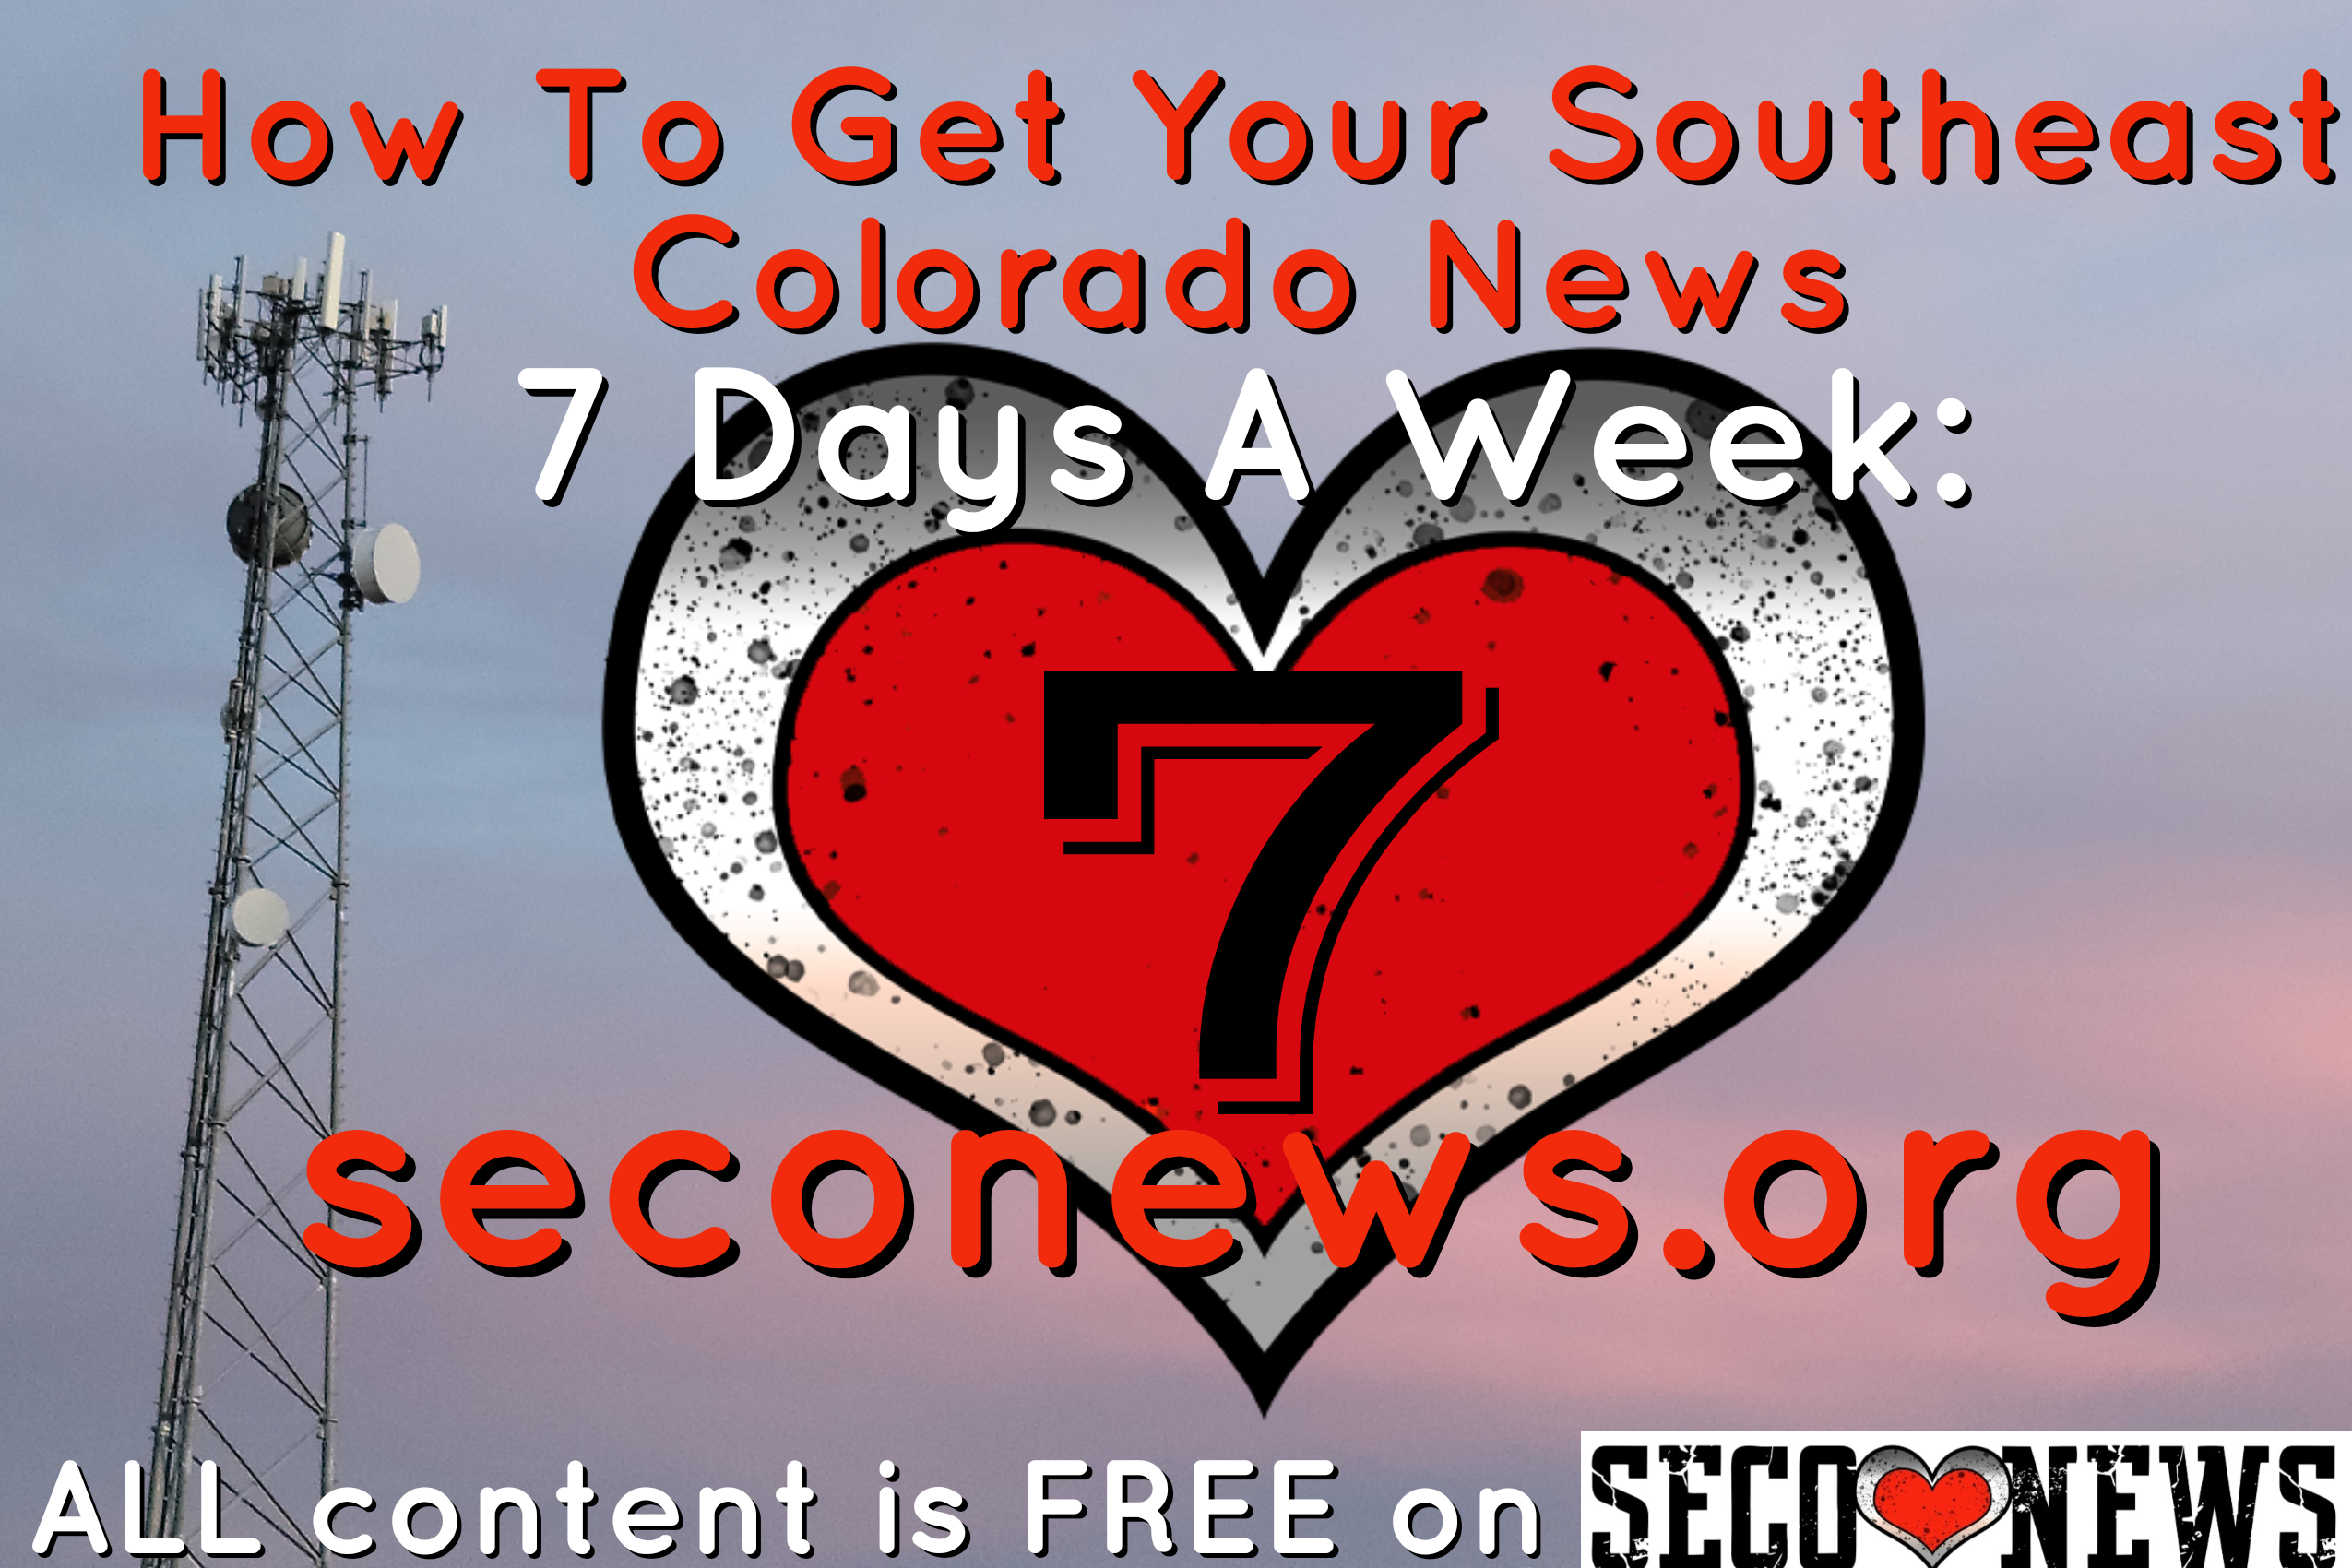 SECO News 7 days a week for free promo image